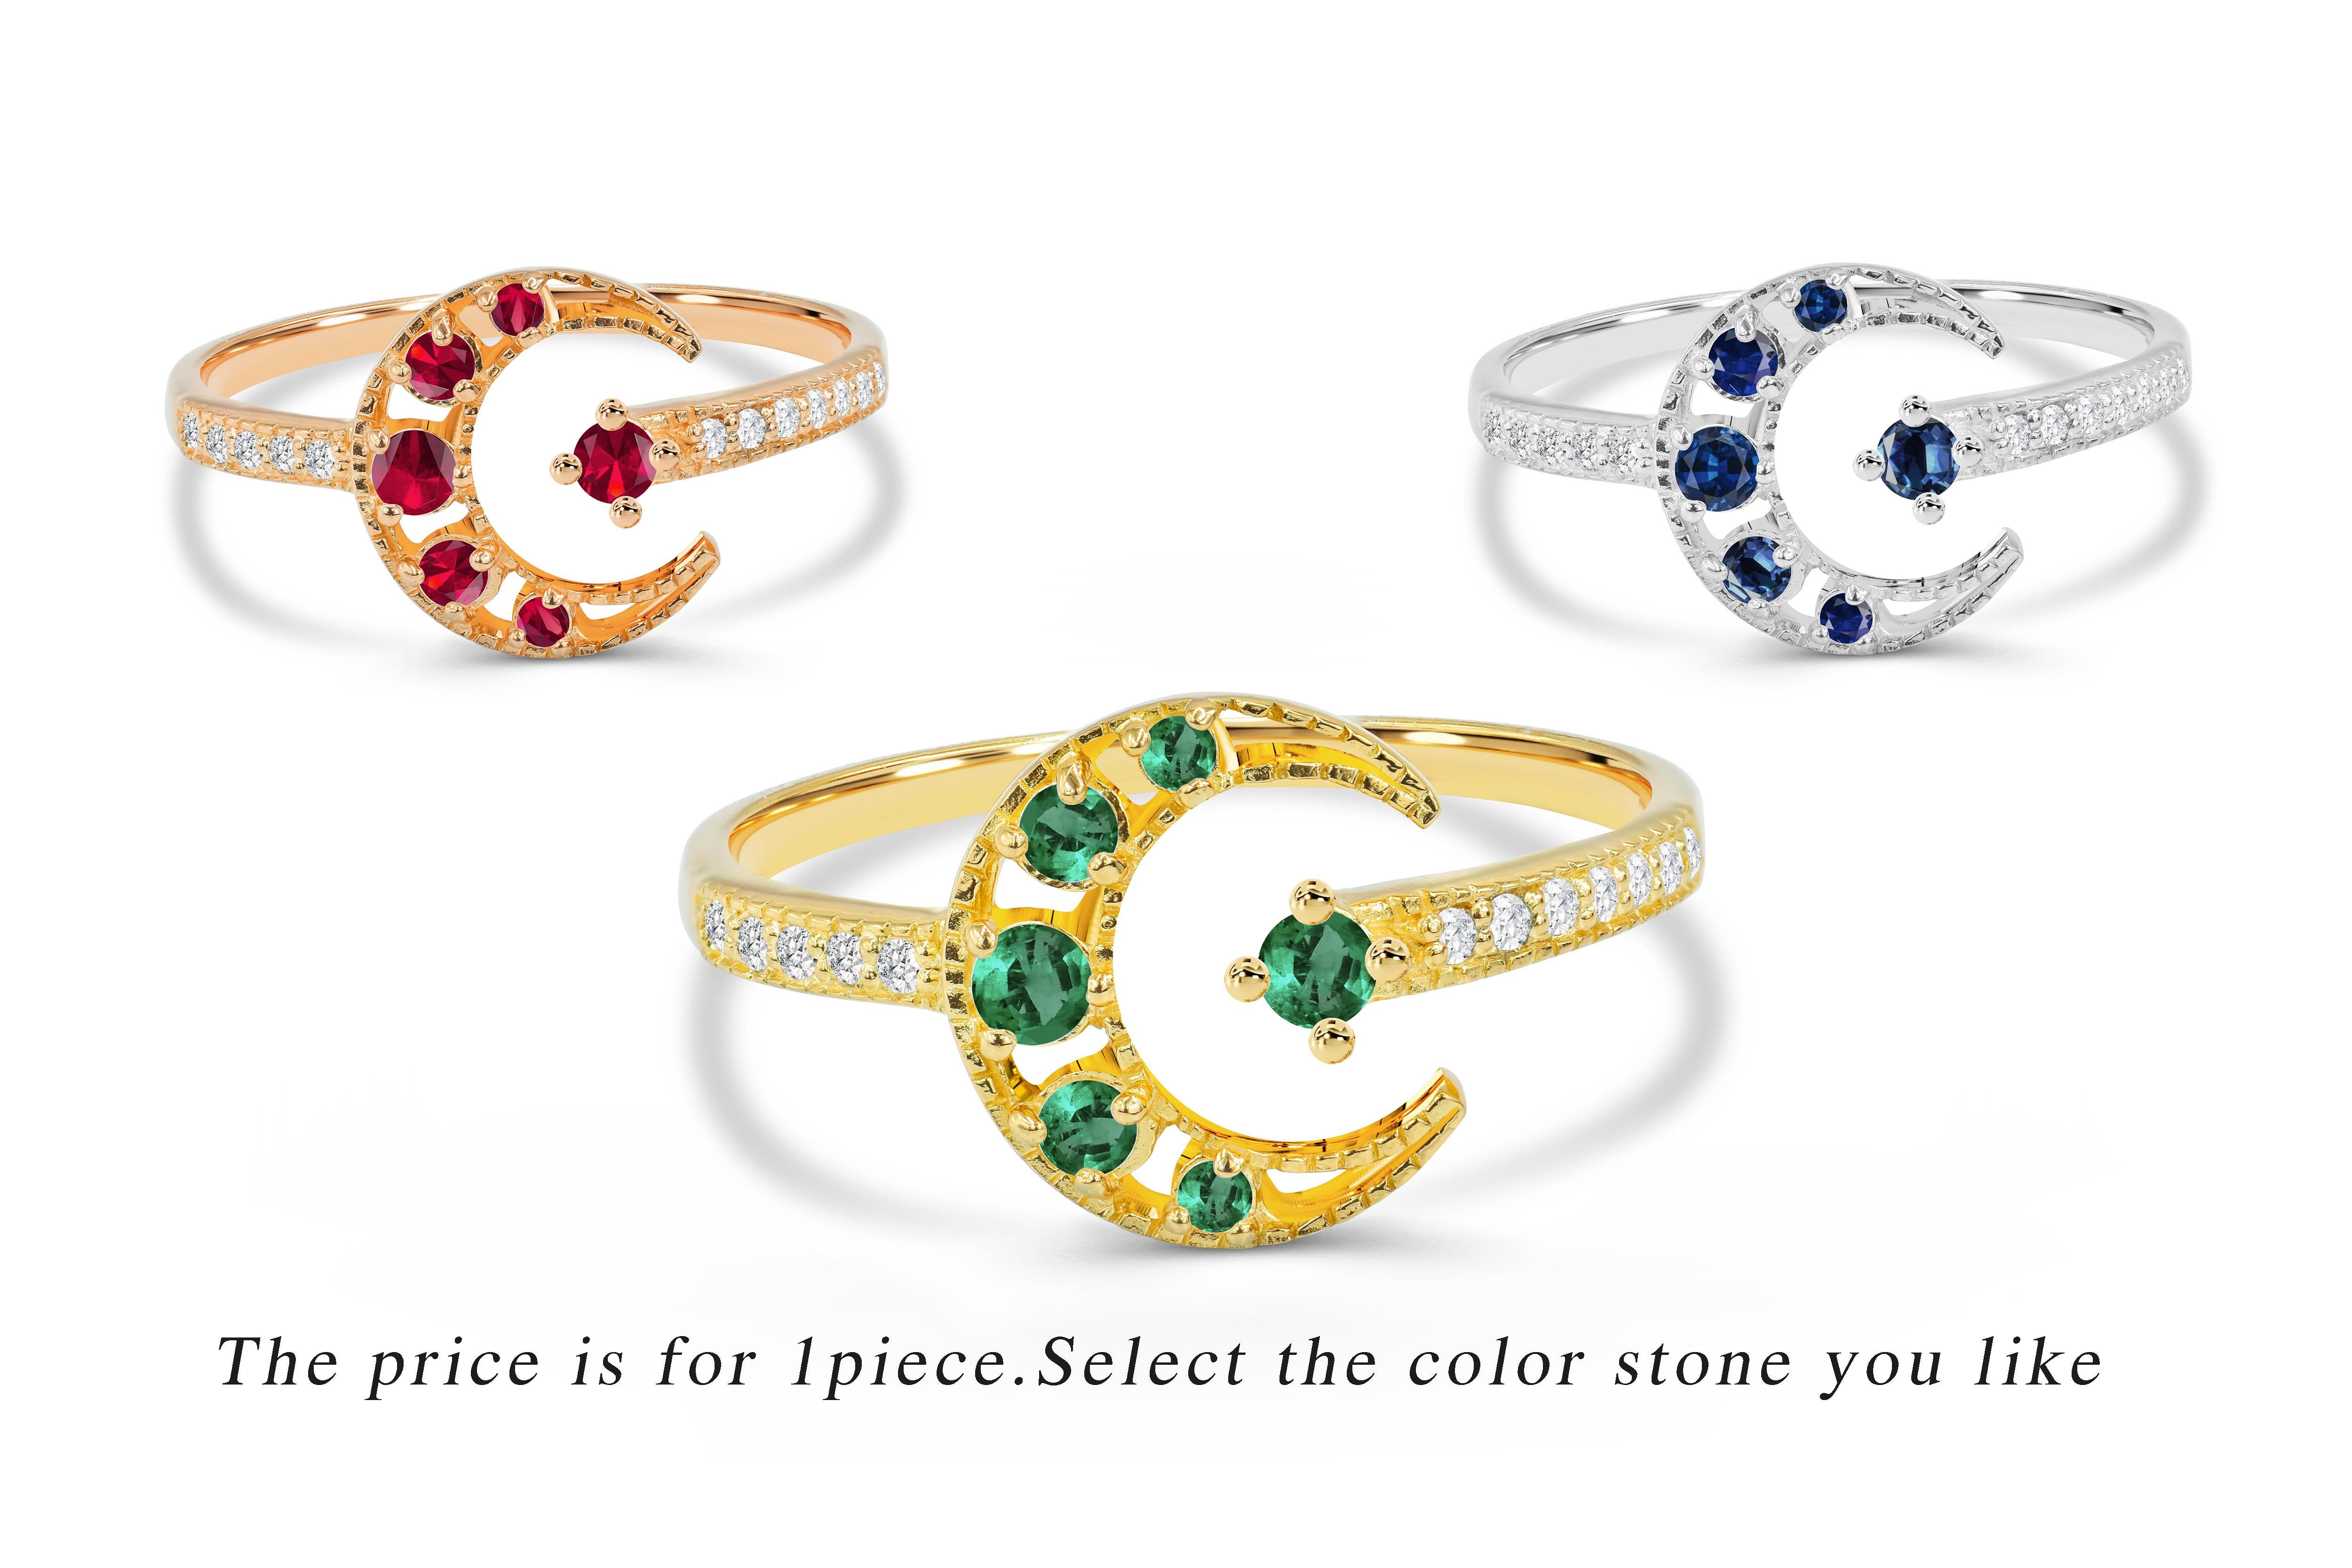 0.31 Ct Emerald, Ruby and Sapphire Crescent Moon Diamond Ring in 14K Gold